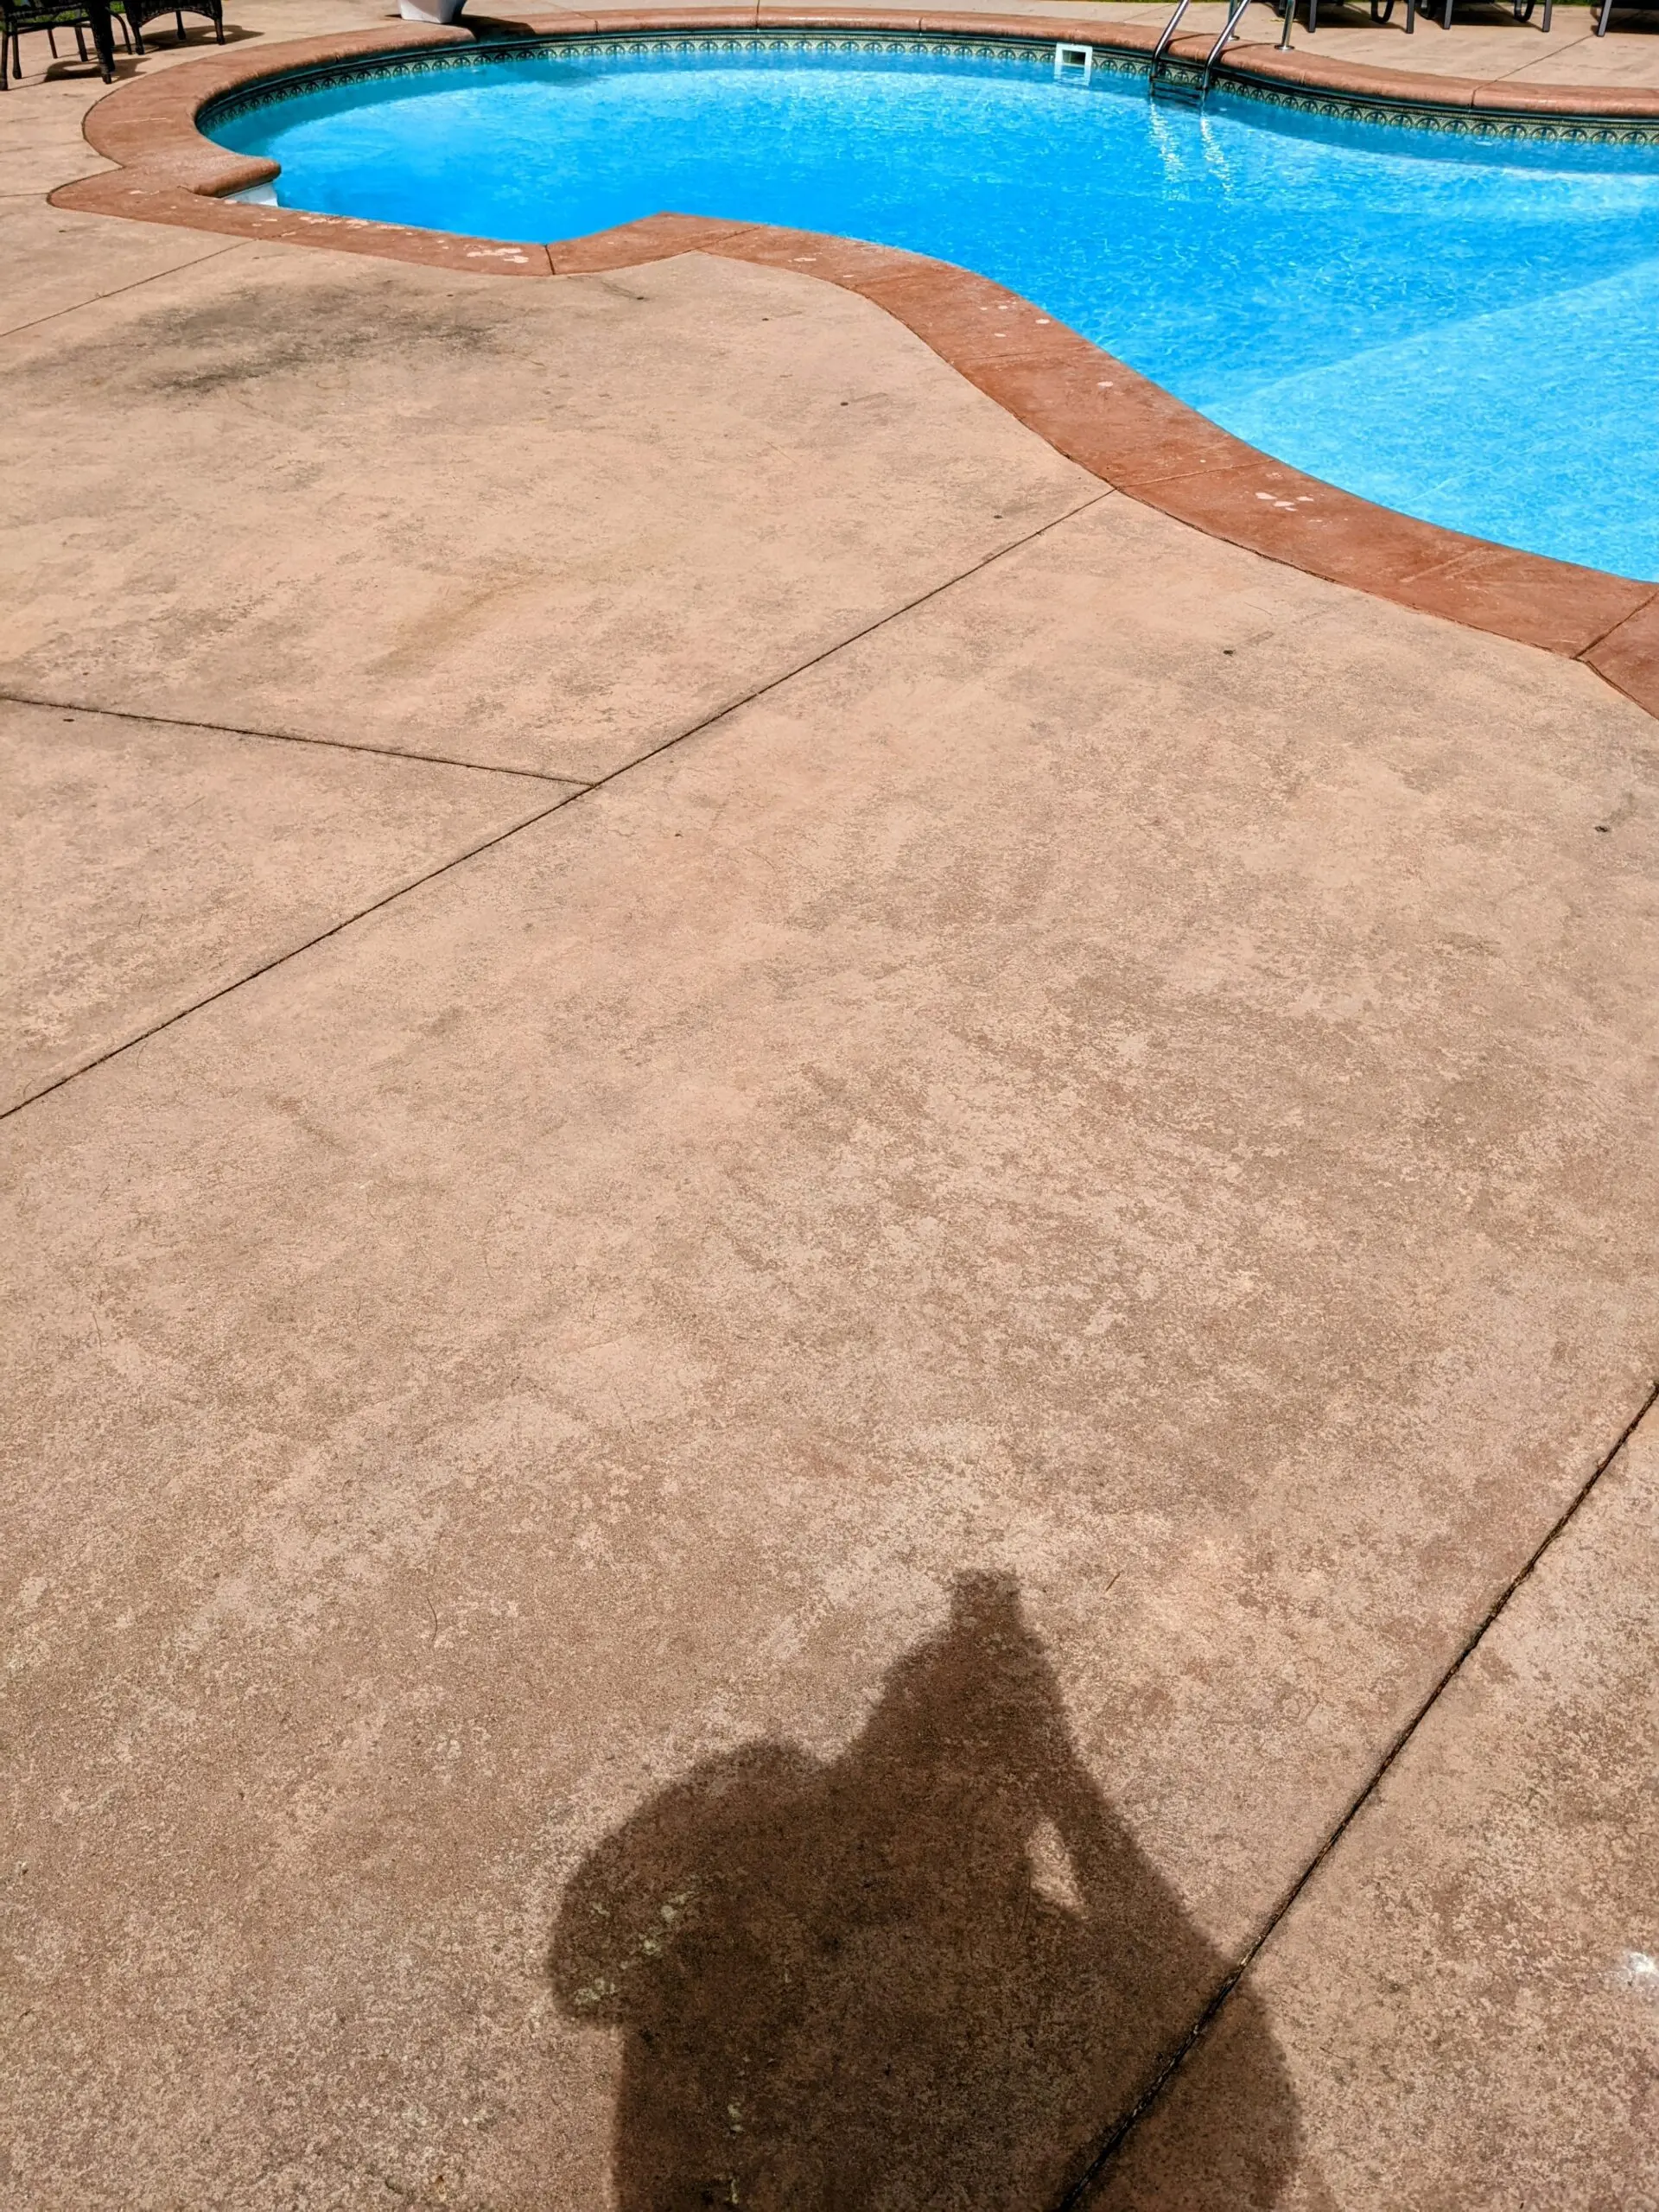 Faded and weathered pool deck concrete prior to renovation